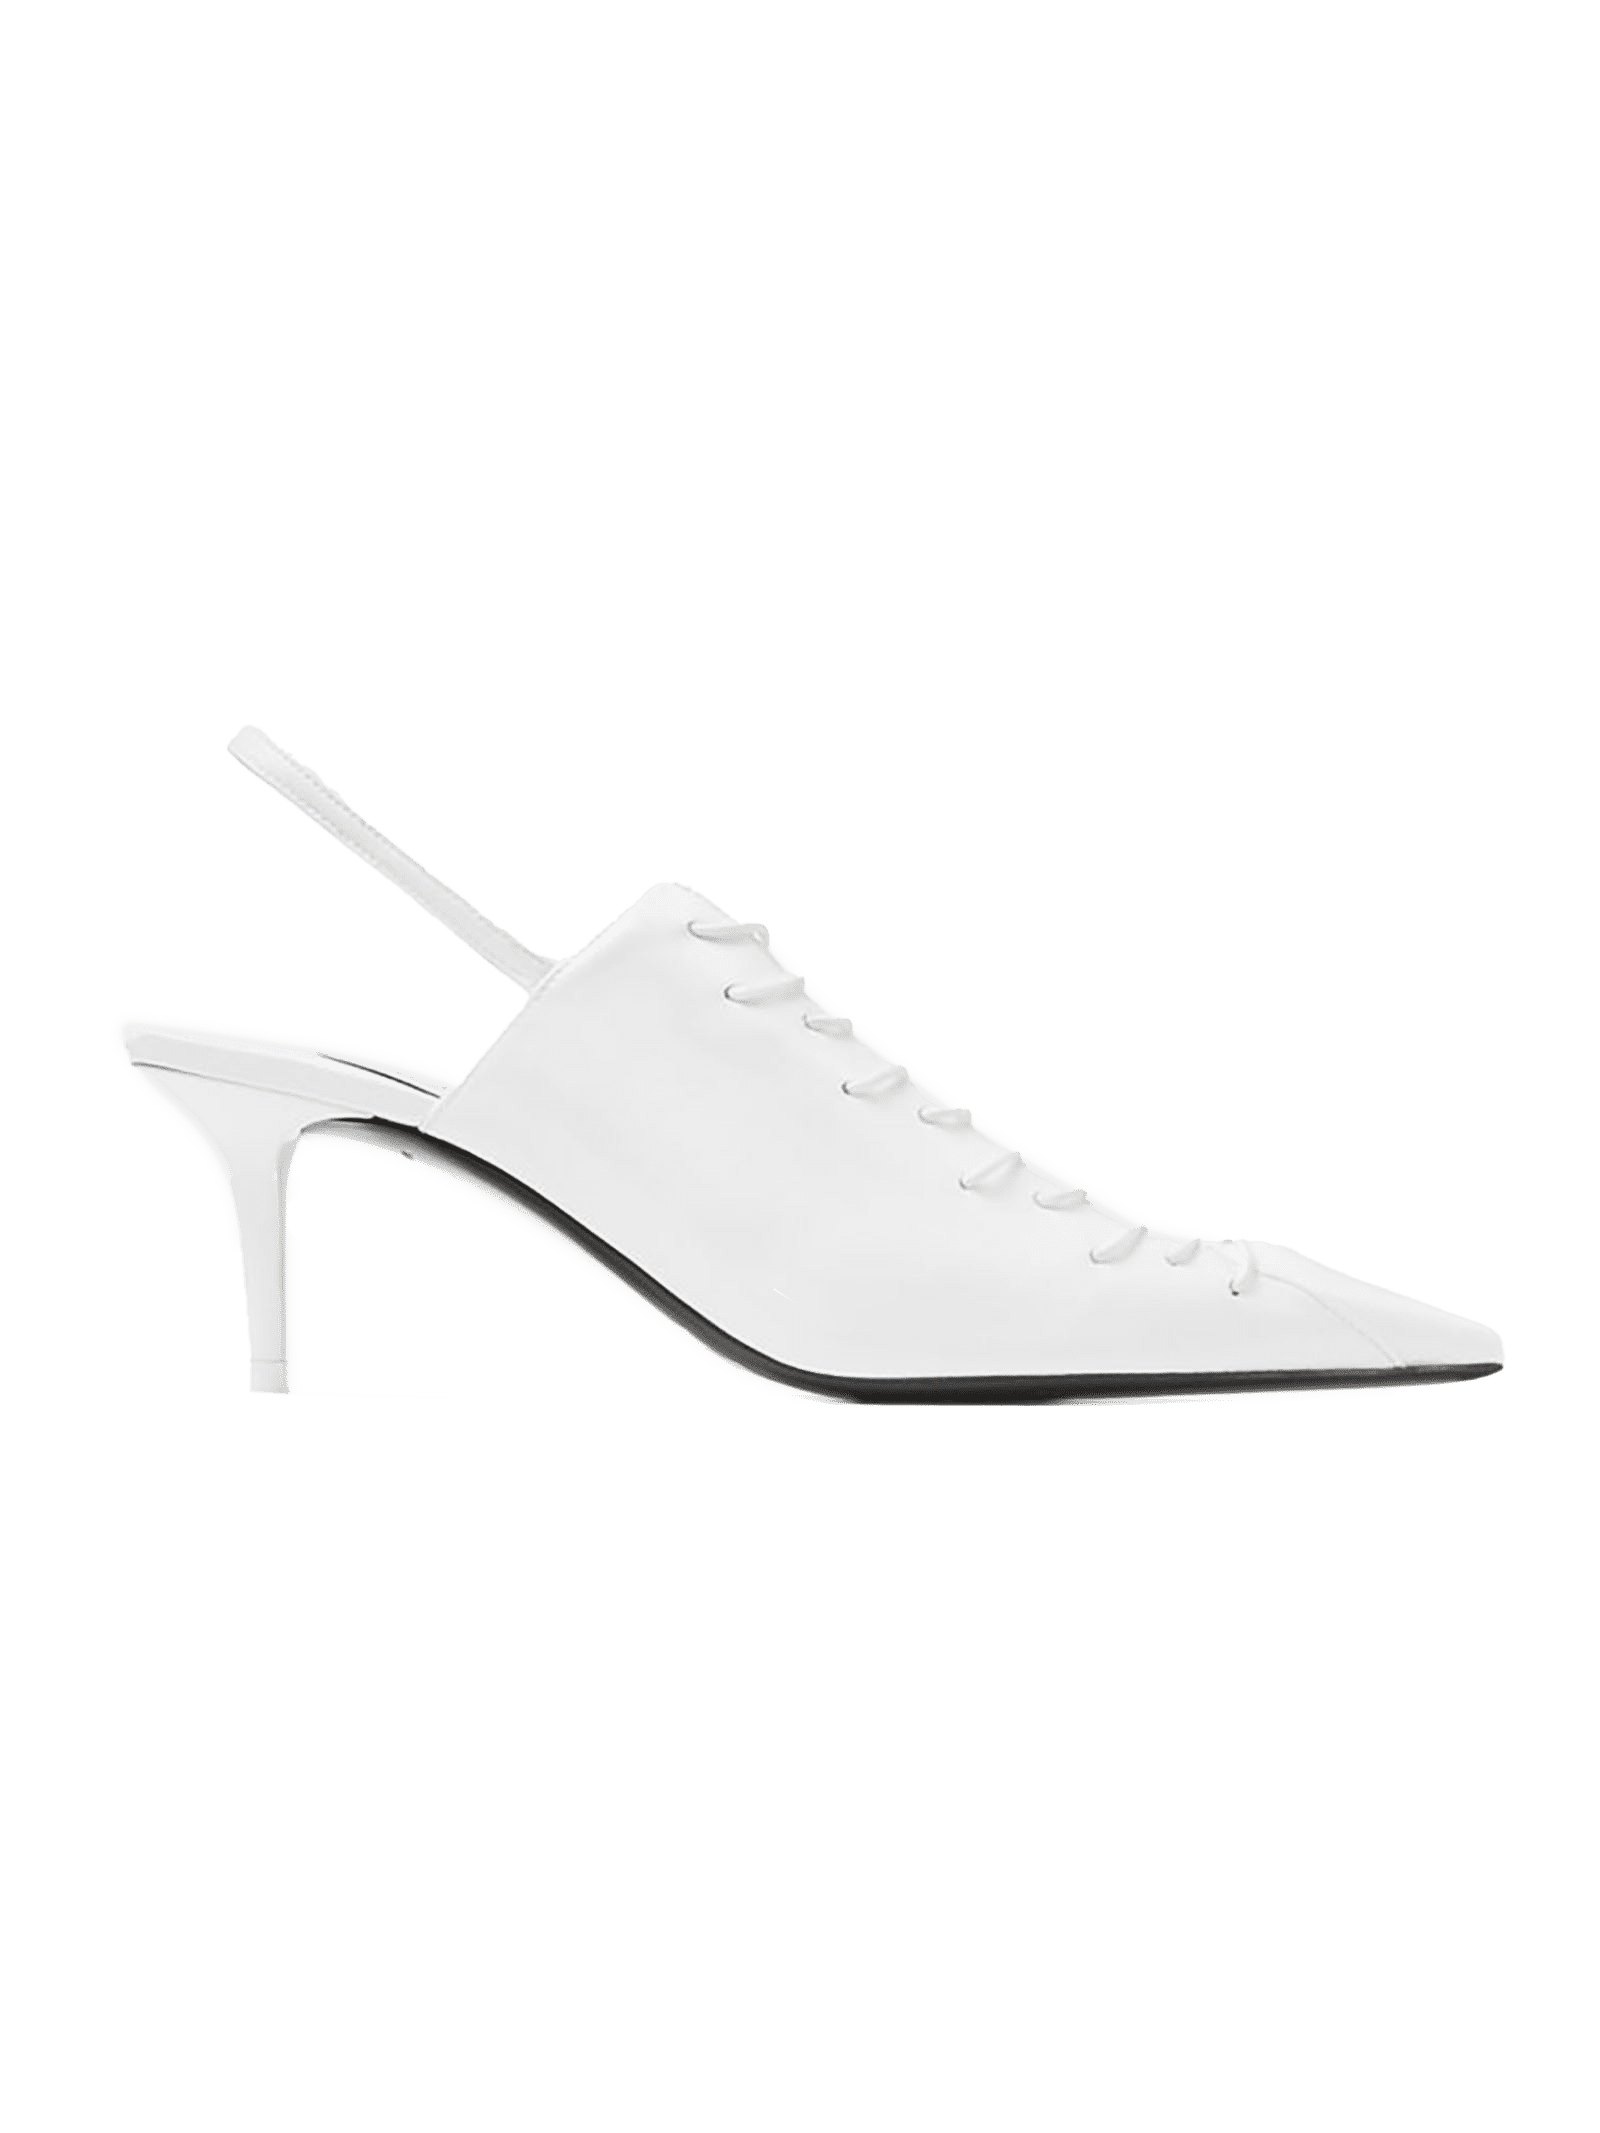 JIMMY CHOO X JEAN PAUL GAULTIER Opitcal White Patent Fabric Sling Back Pumps With Laces